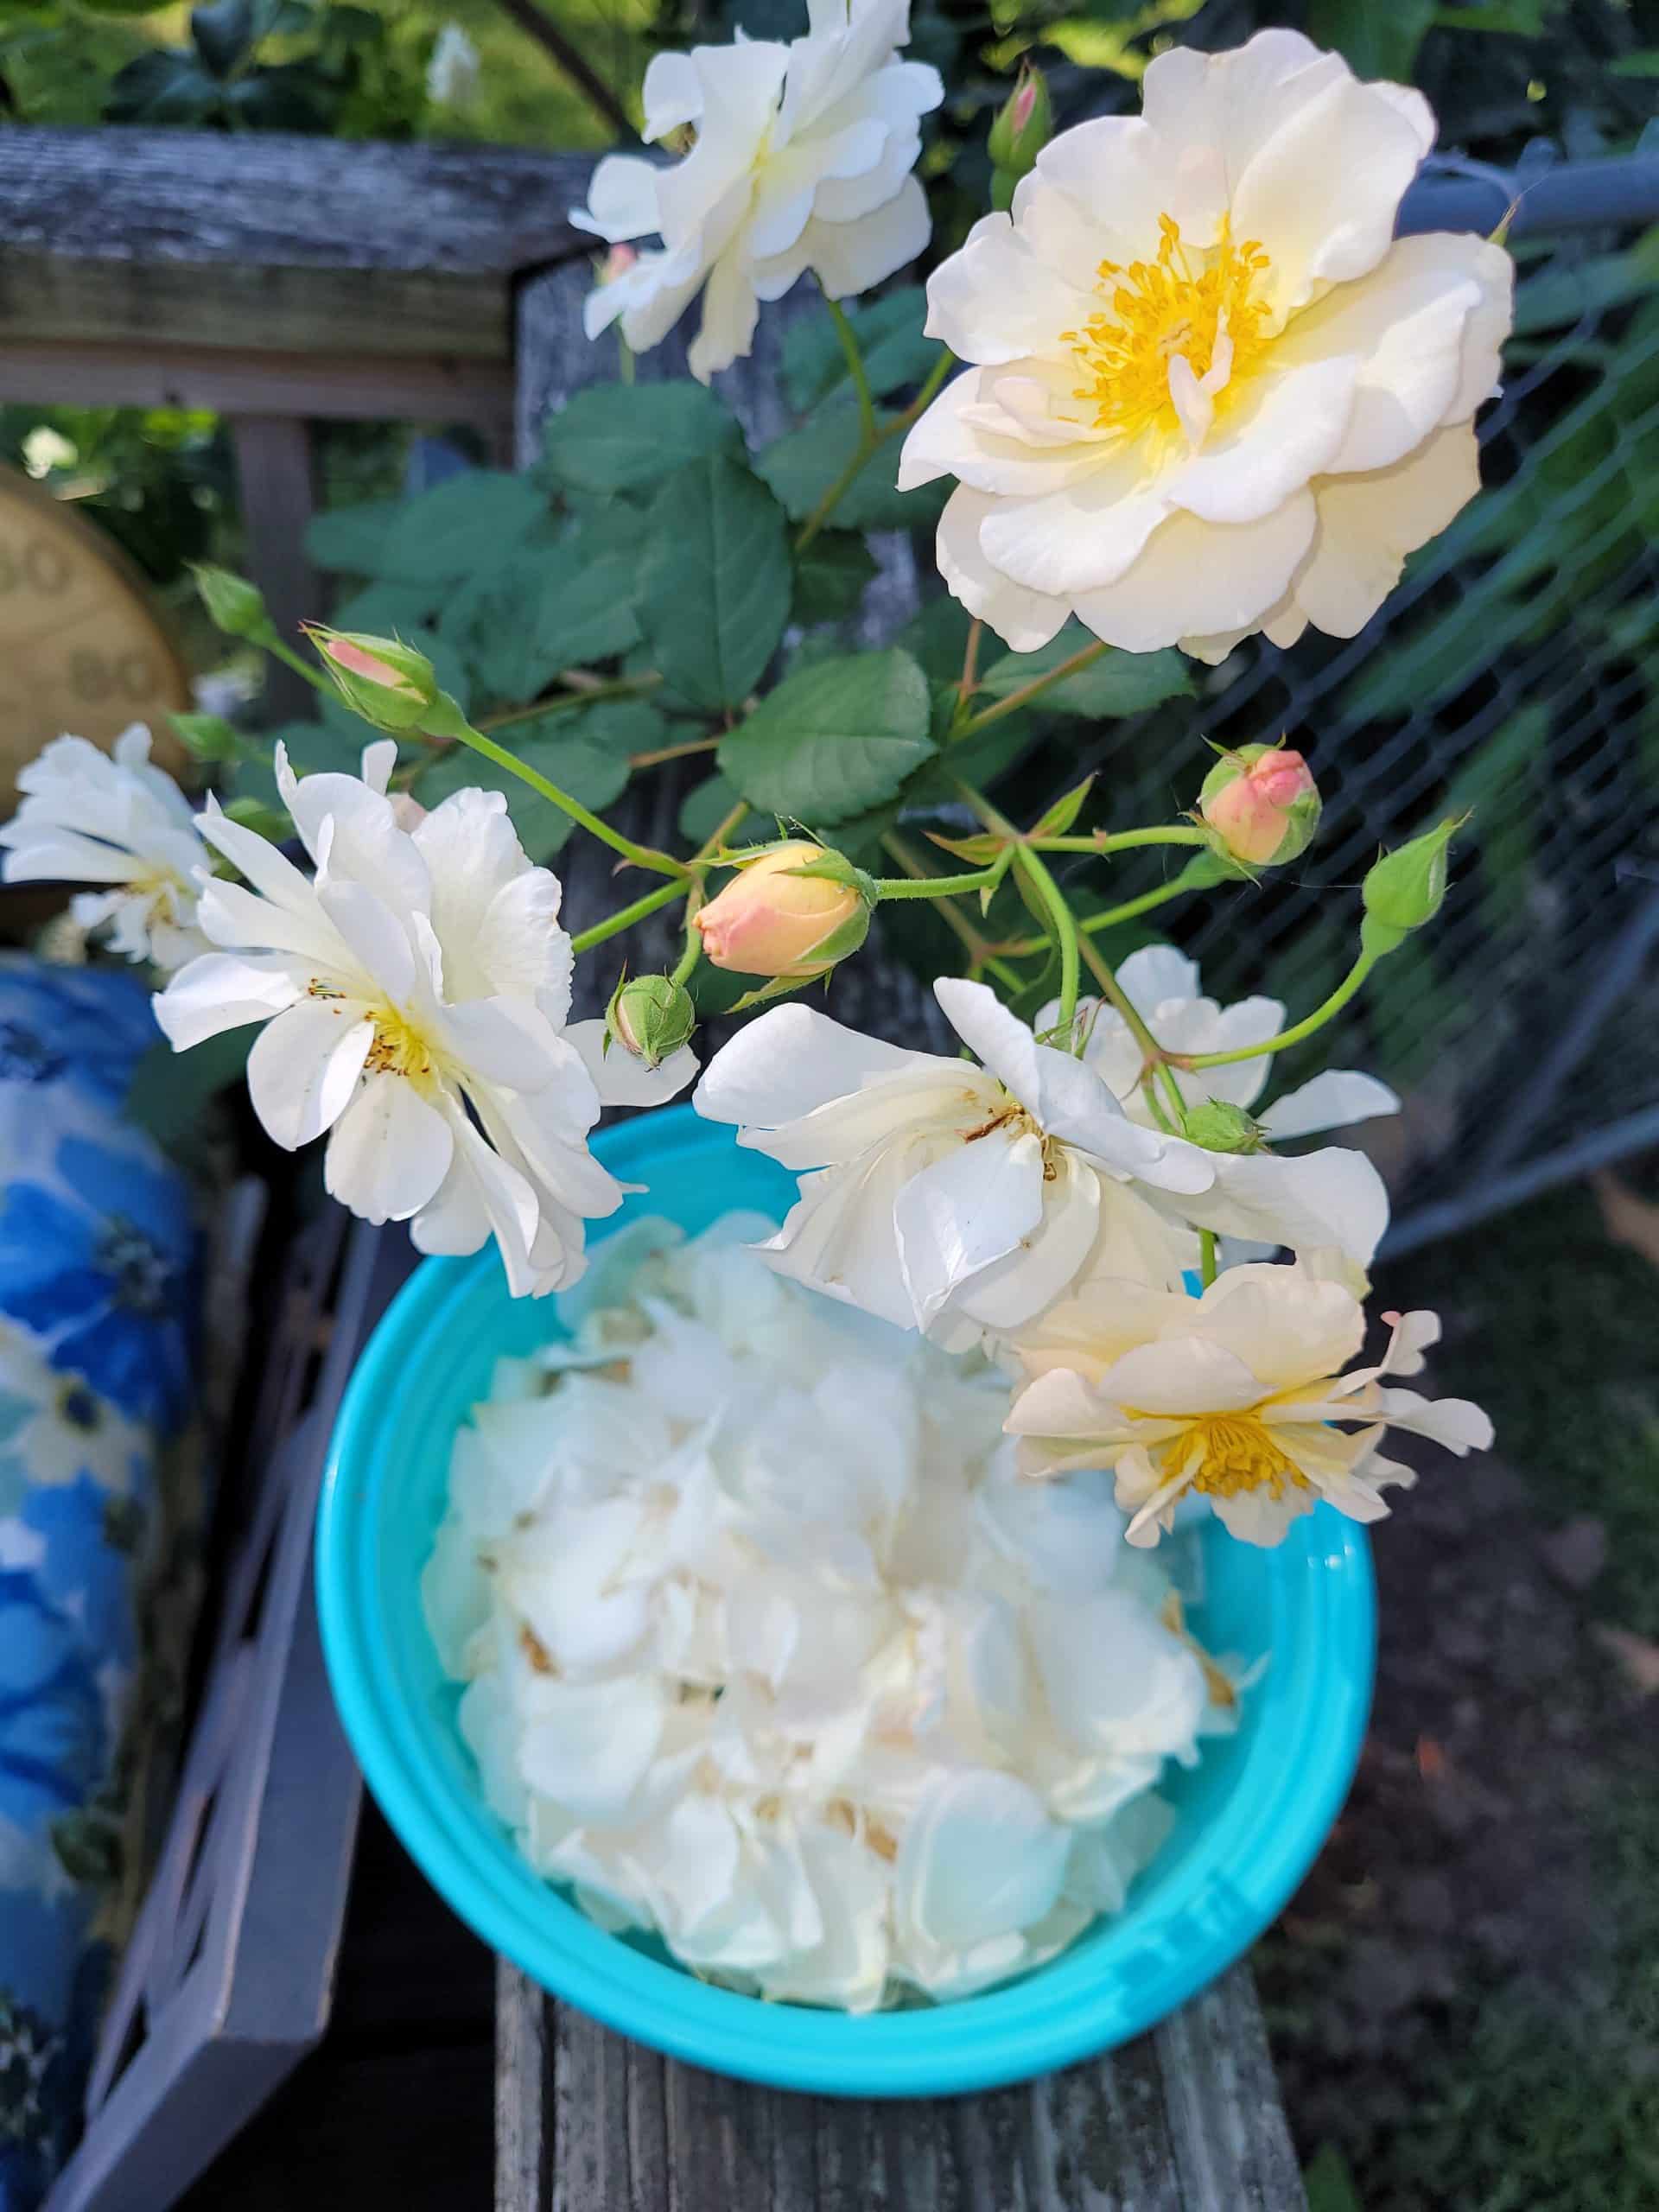 A bowlful of white rose petals gathered from a ‘Penelope’ rose